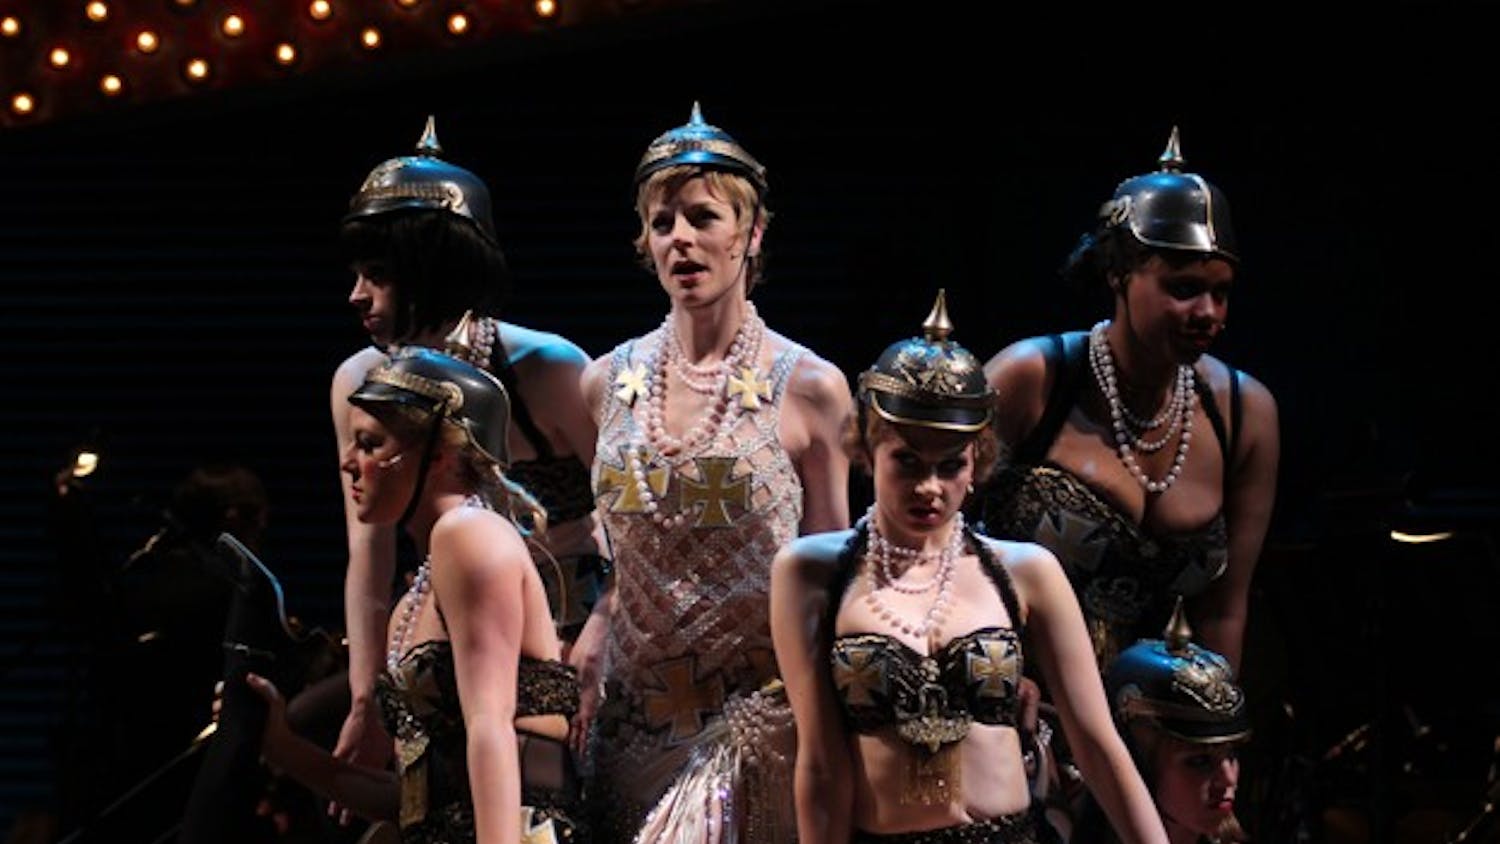 Lisa Brescia (center) performs in Playmakers' Cabaret as Sally Bowles performing the number "Mein Herr" with members of the cast.